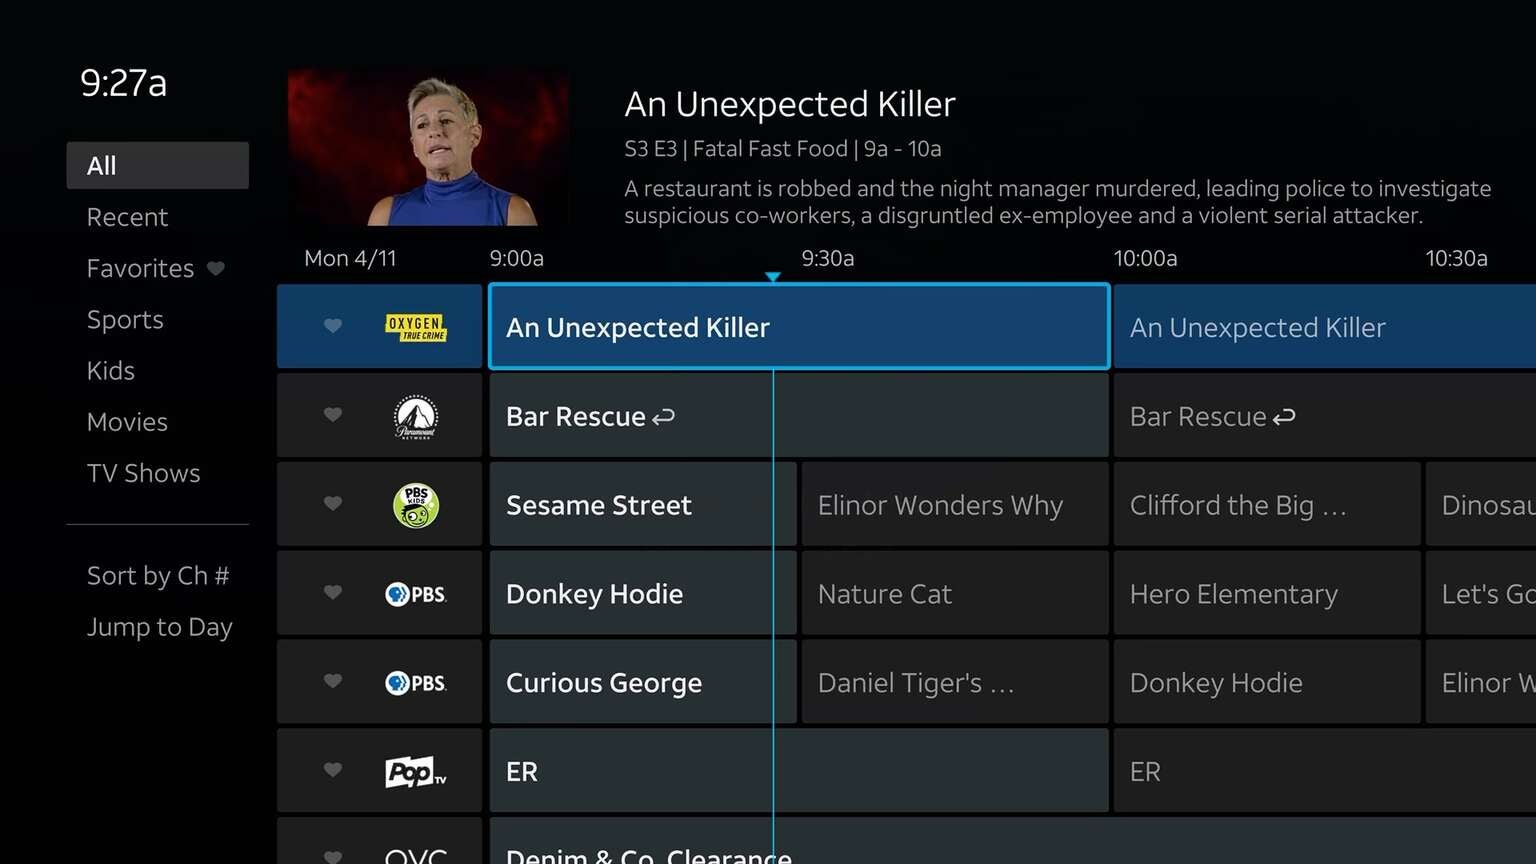 directv-stream-rolls-out-new-grid-guide-better-navigation-channel